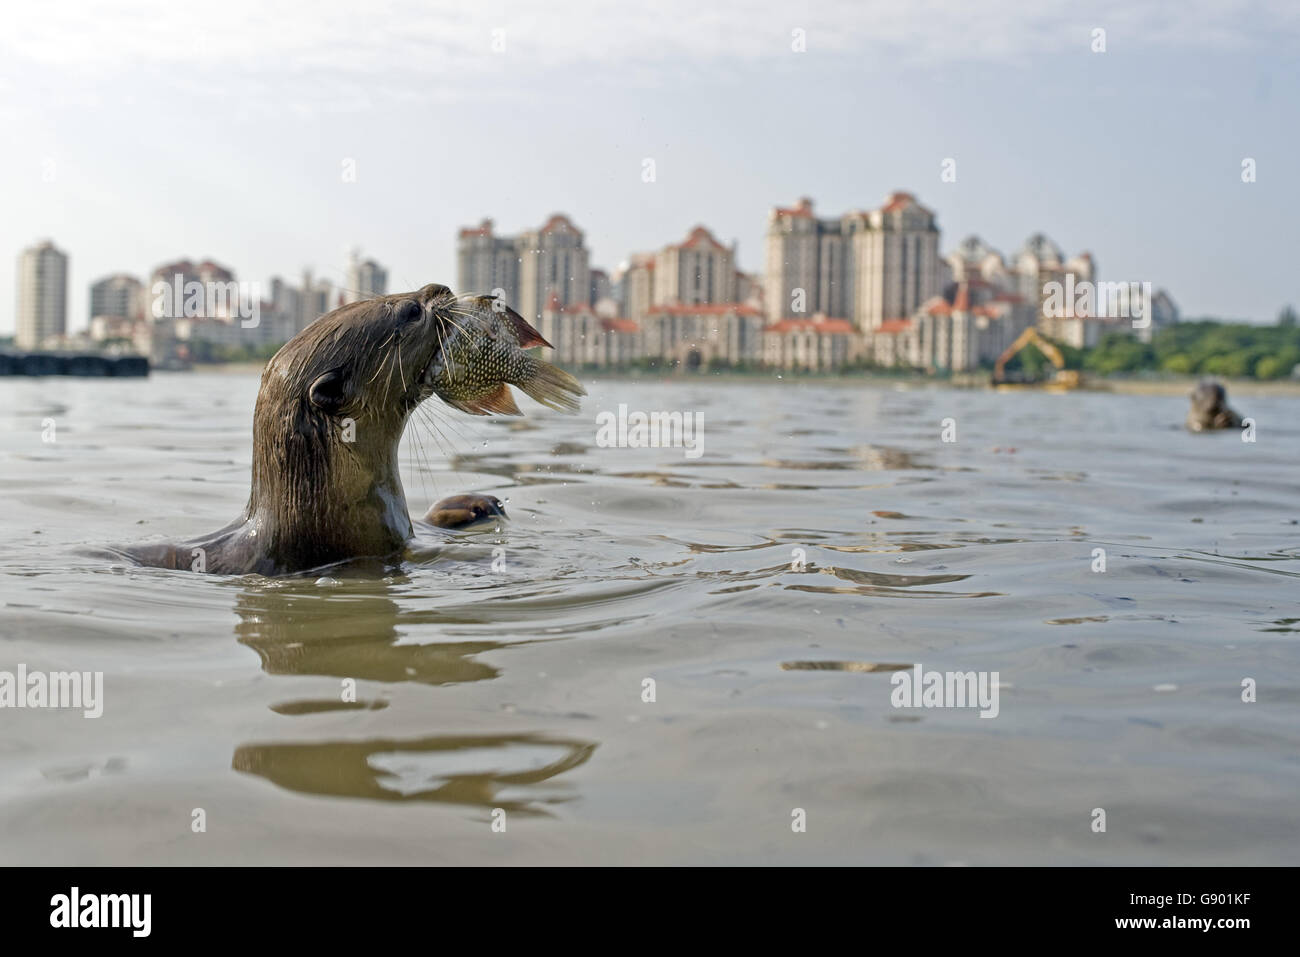 Singapore. 1st July, 2016. Photo taken on July 1, 2016 shows a member of a wild otter family called 'Bishan10' in Singapore's Kallang Basin area. The size of this wild otter family has enlarged from only two otters spotted for the first time in Singapore's central area Bishan Park in 2014 to ten otters till now. As a result, Singapore's otter enthusiasts nicknamed them as 'Bishan10'. Within these 2 years, there is an increase in sightings of different otter families in many places of Singapore. Credit:  Xinhua/Alamy Live News Stock Photo